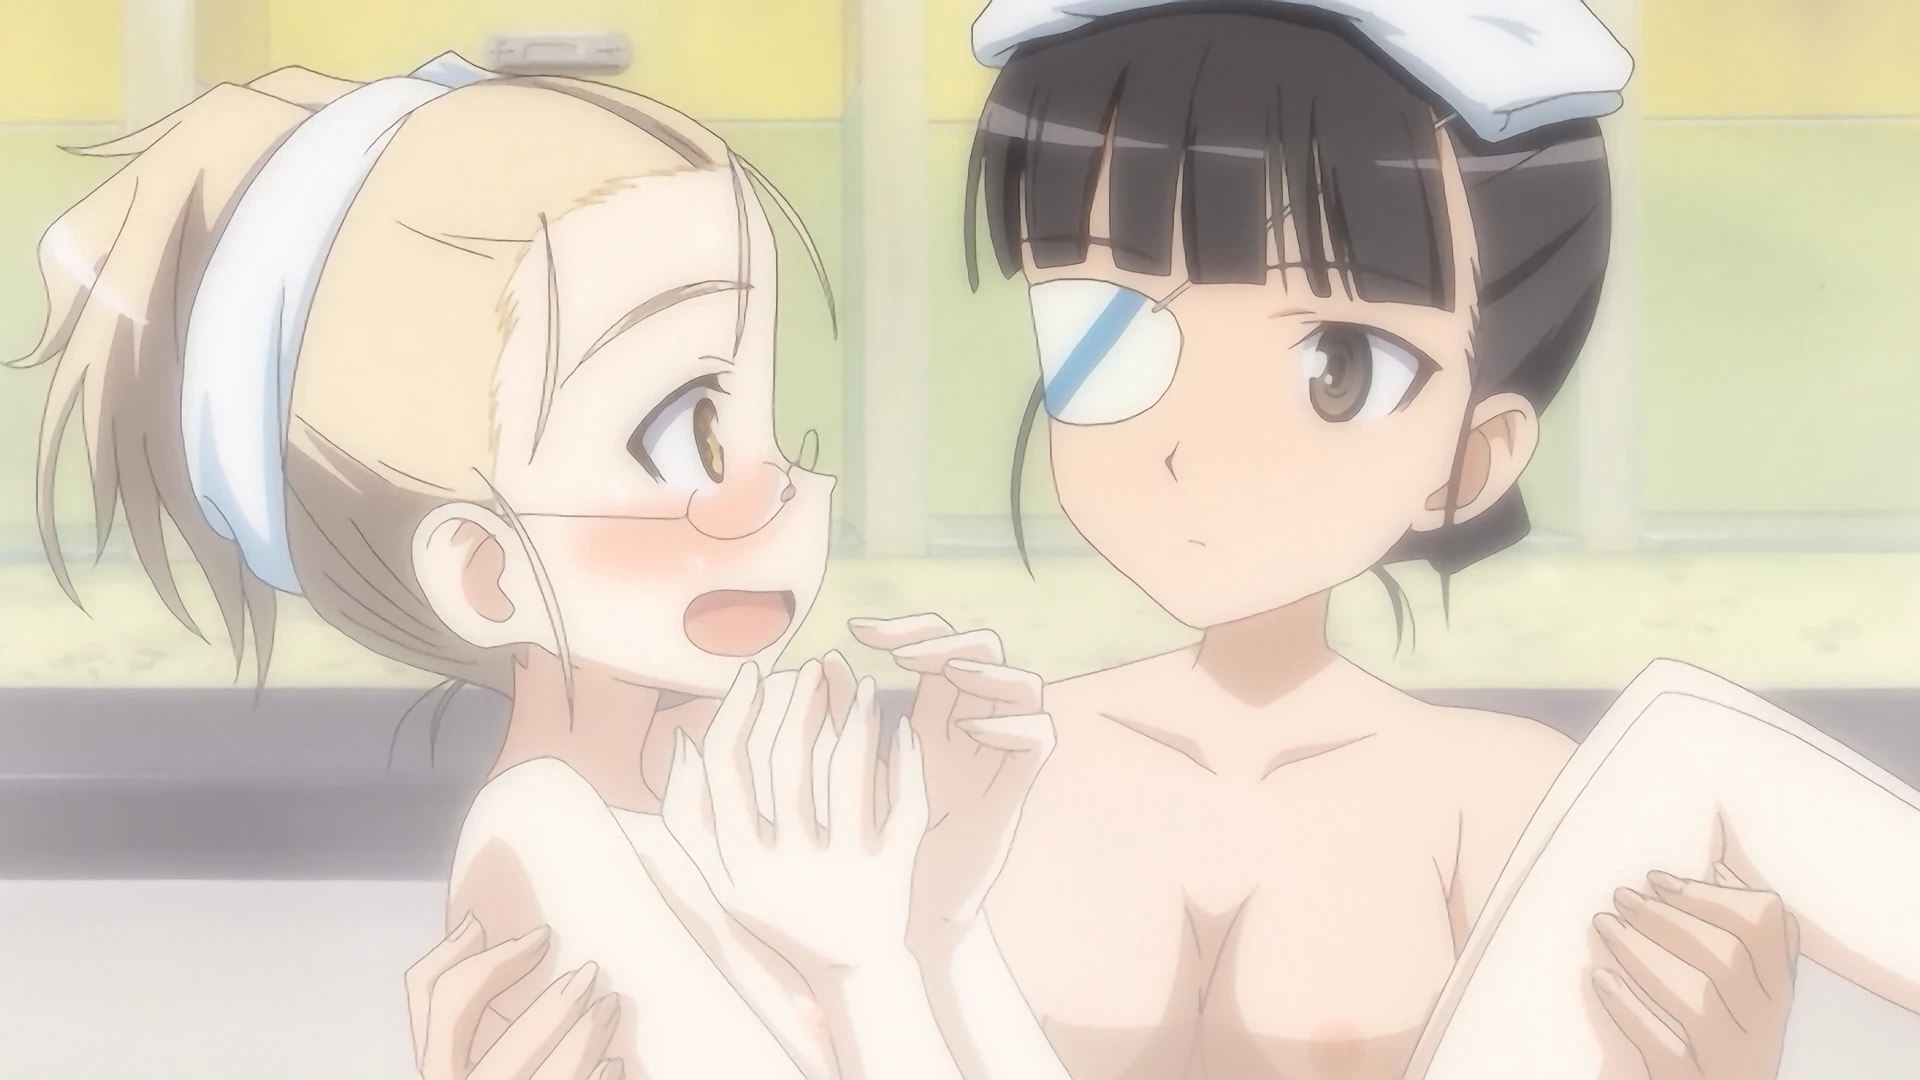 Strike Witches - S01E07 - Perrine H. Clostermann, Sakamoto Mio nude fanservice